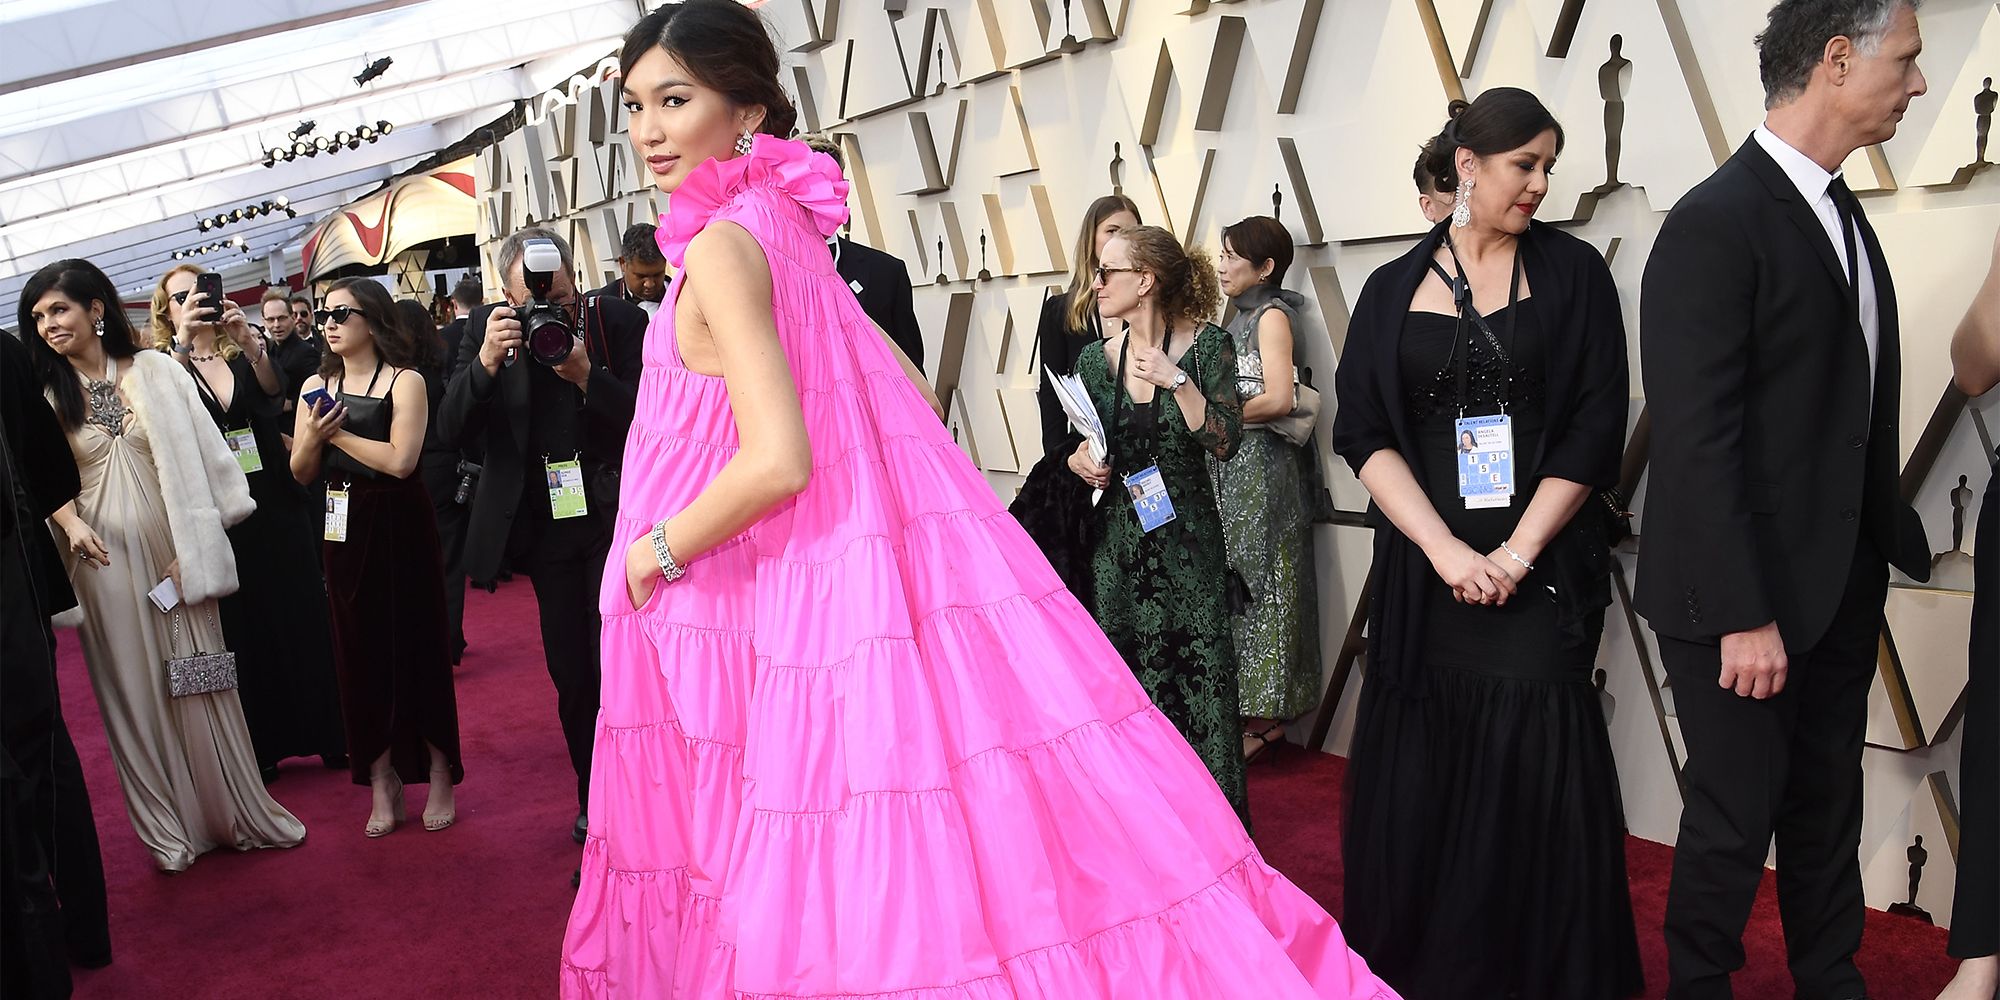 Daring Dresses and Best Princess Gowns from the Oscars Red Carpet | Observer